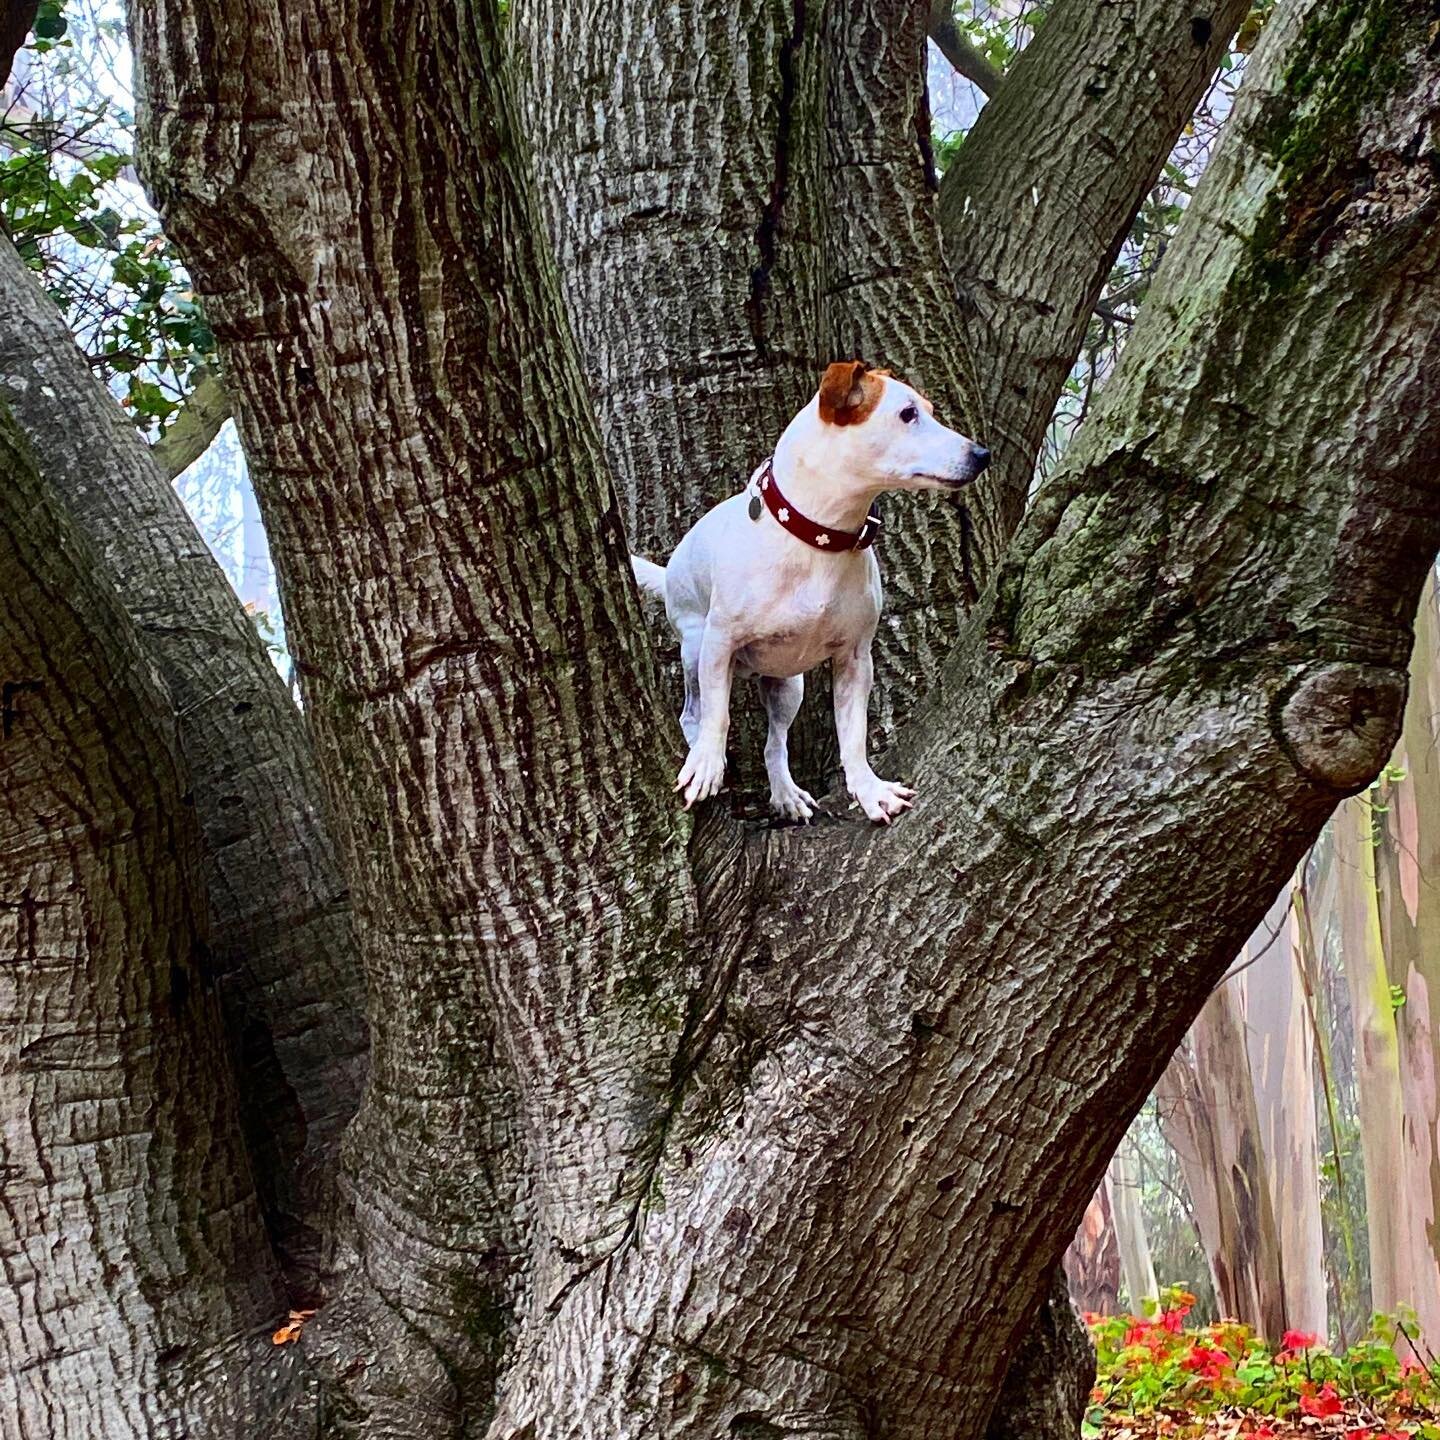 Morning walk in #oakland ca with the #javier. #jrt #jackrussell #myfavoritedog #montclair #tree #doginatree